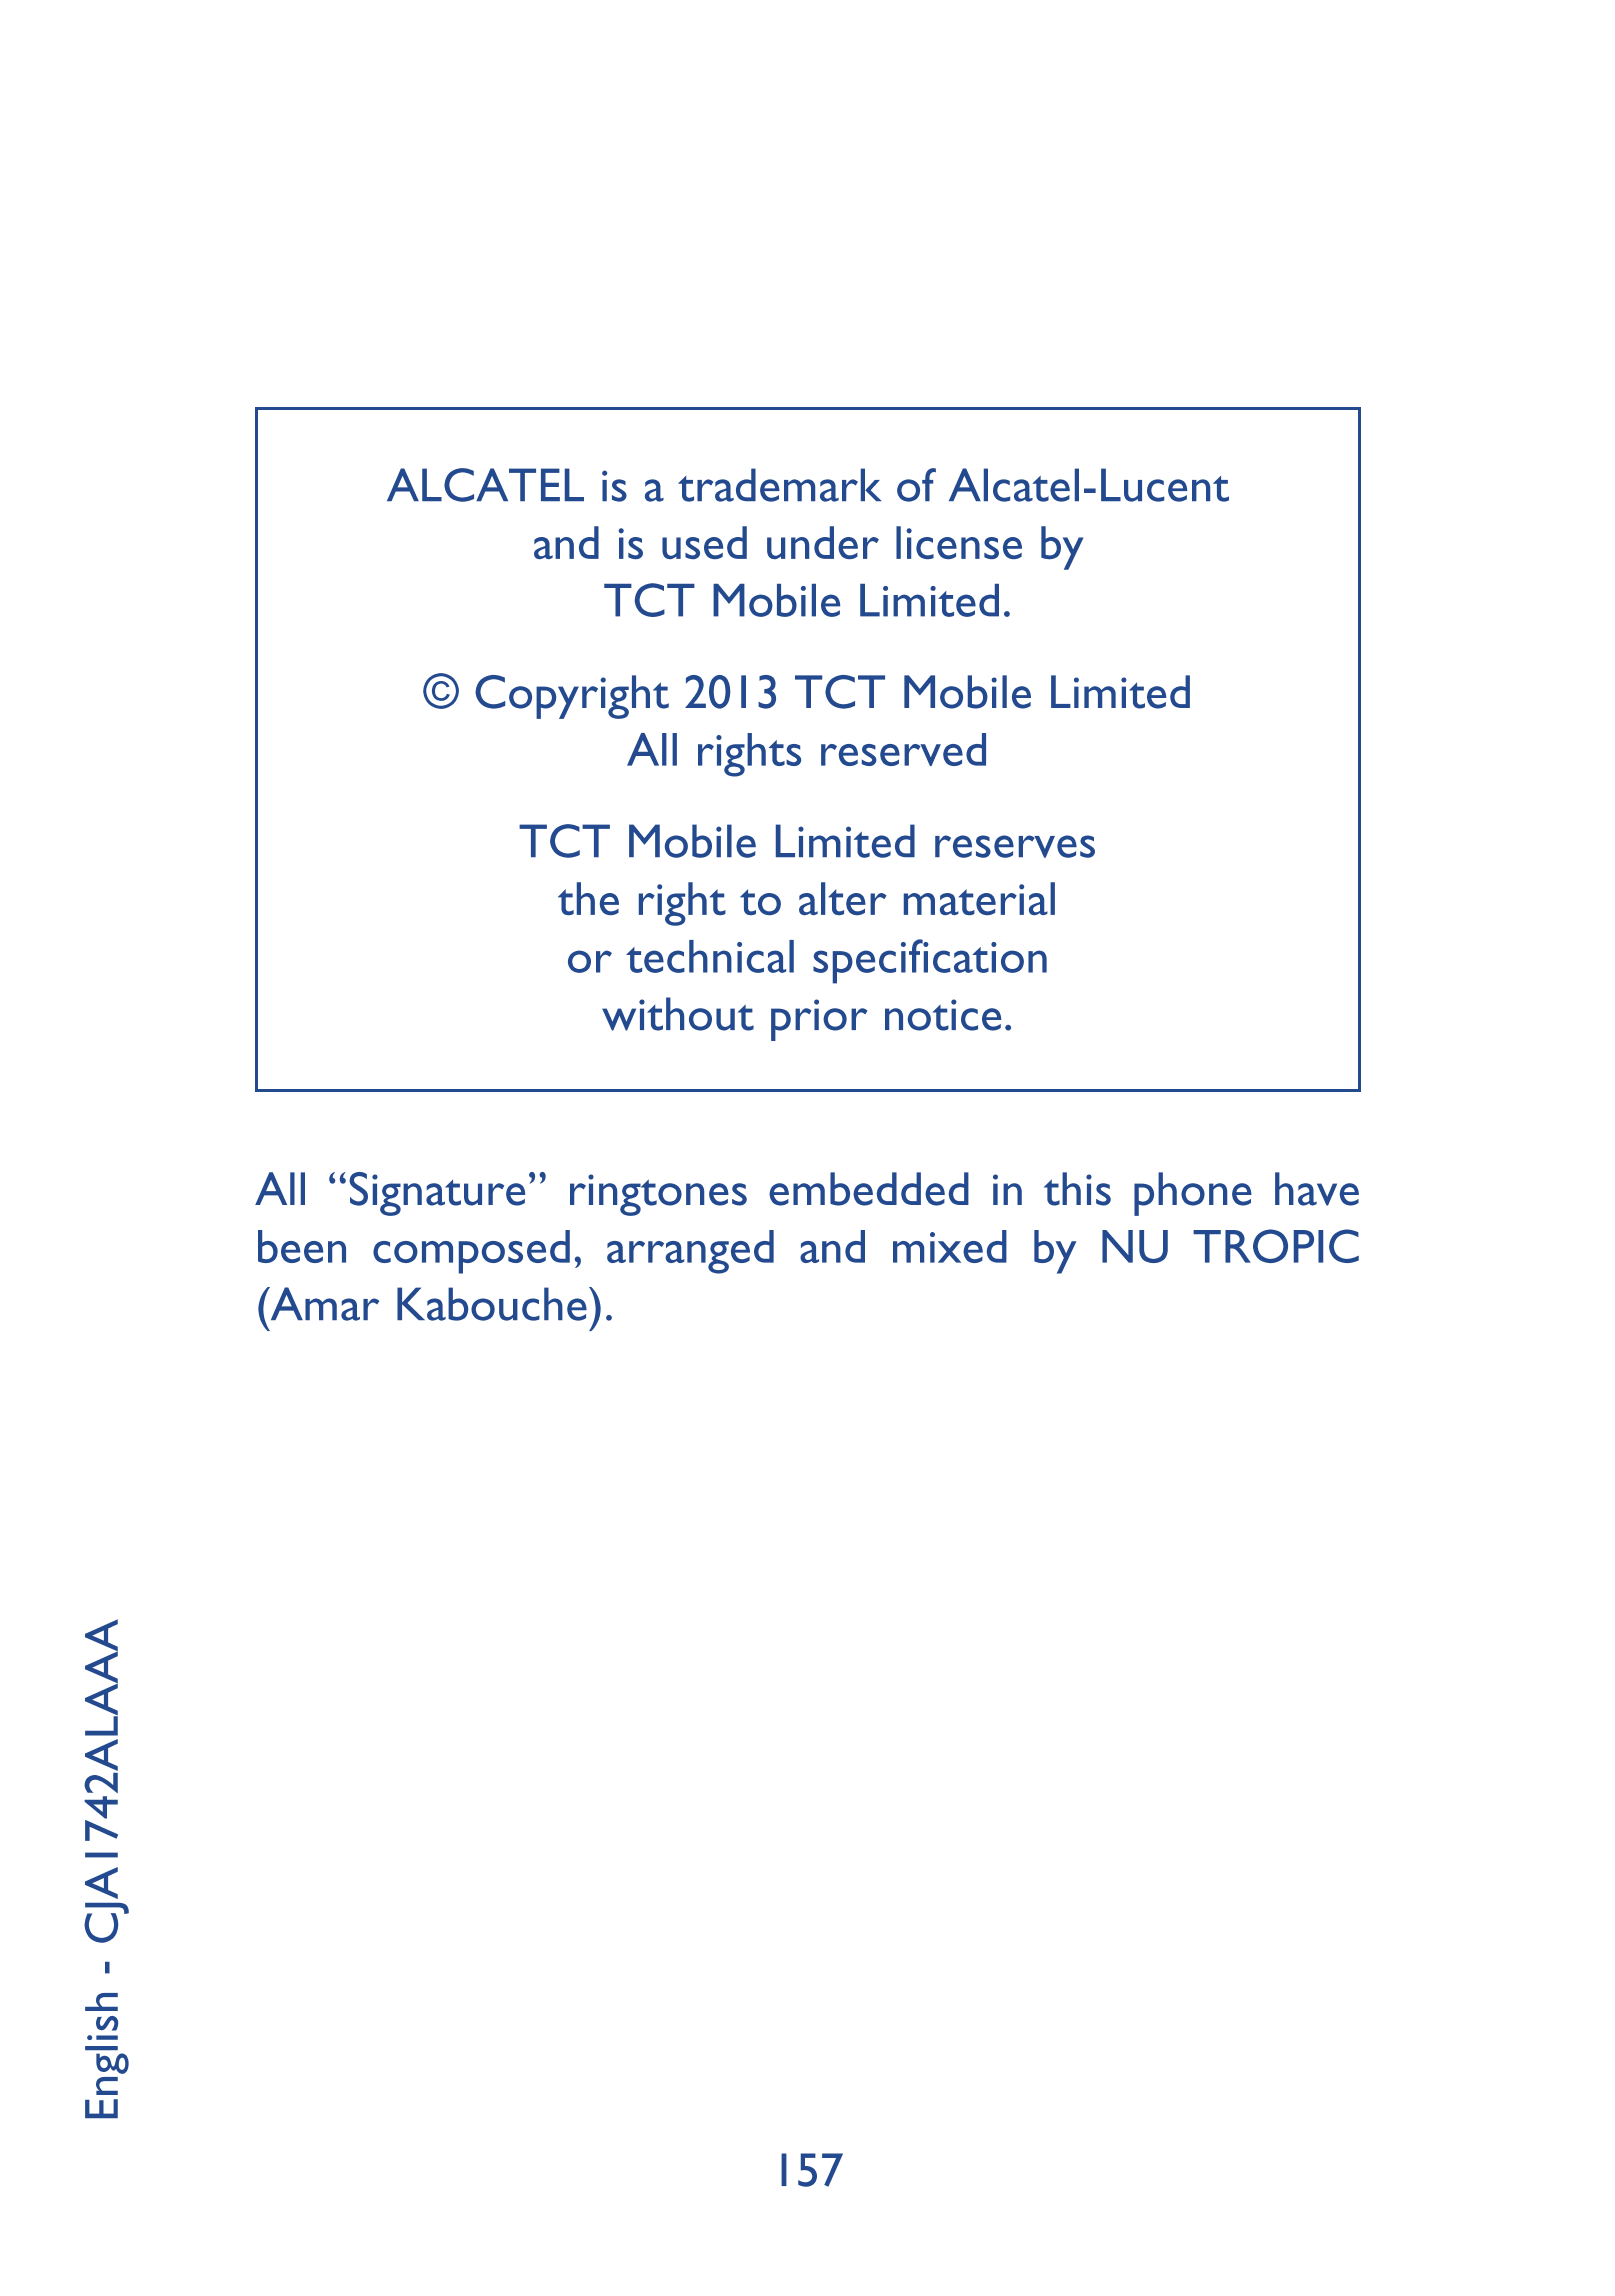 ALCATEL is a trademark of Alcatel-Lucent
and is used under license by 
TCT Mobile Limited.
© Copyright 2013 TCT Mobile Limited
A